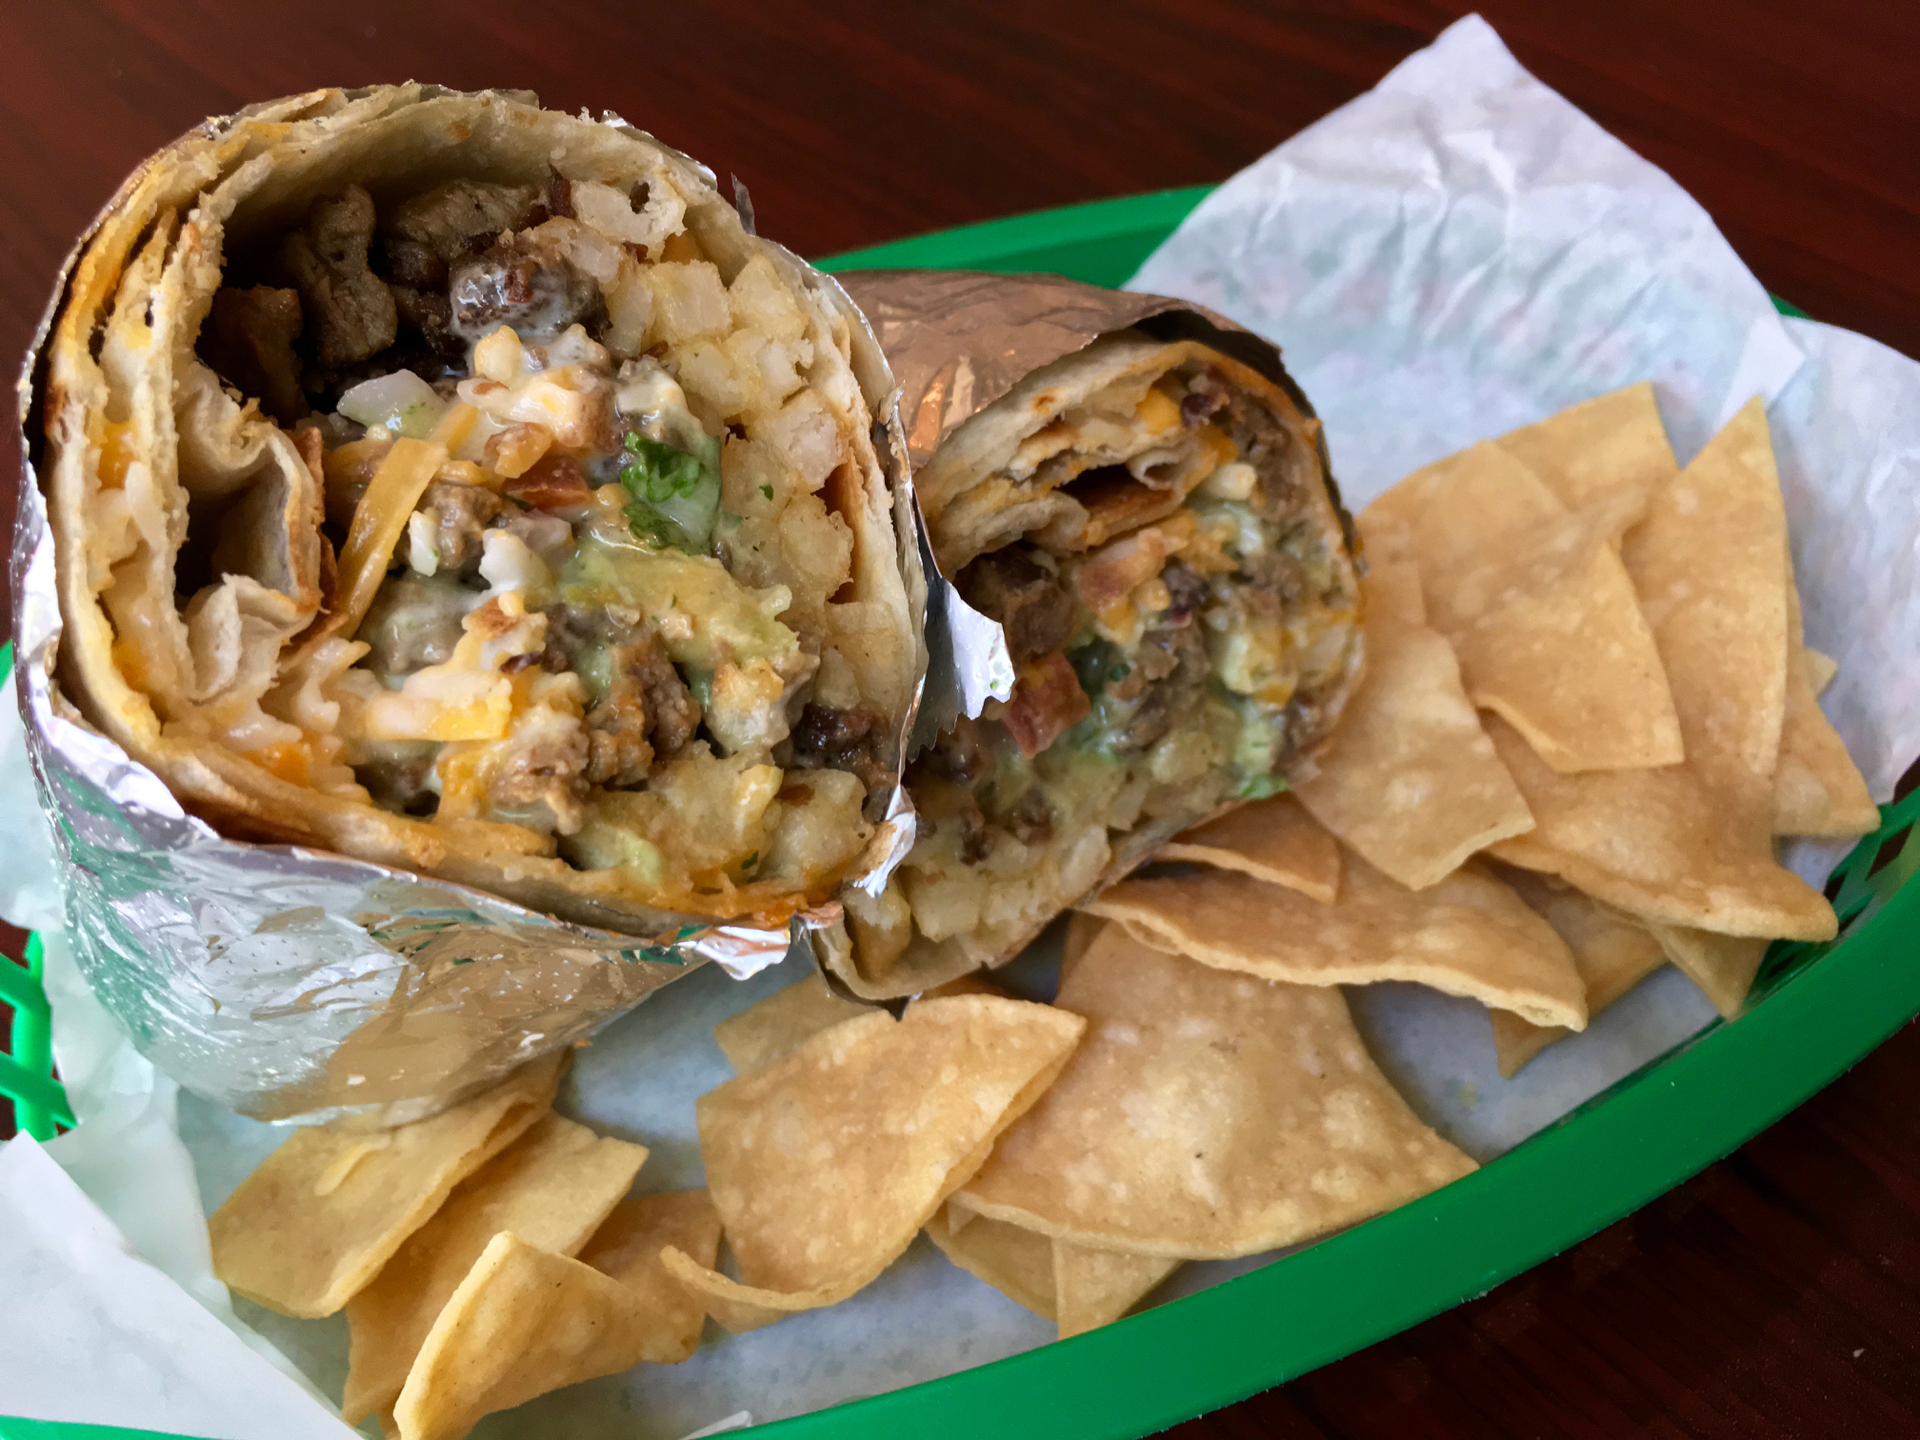 A Cali-burrito with carne asada at Angelou’s Mexican Grill.